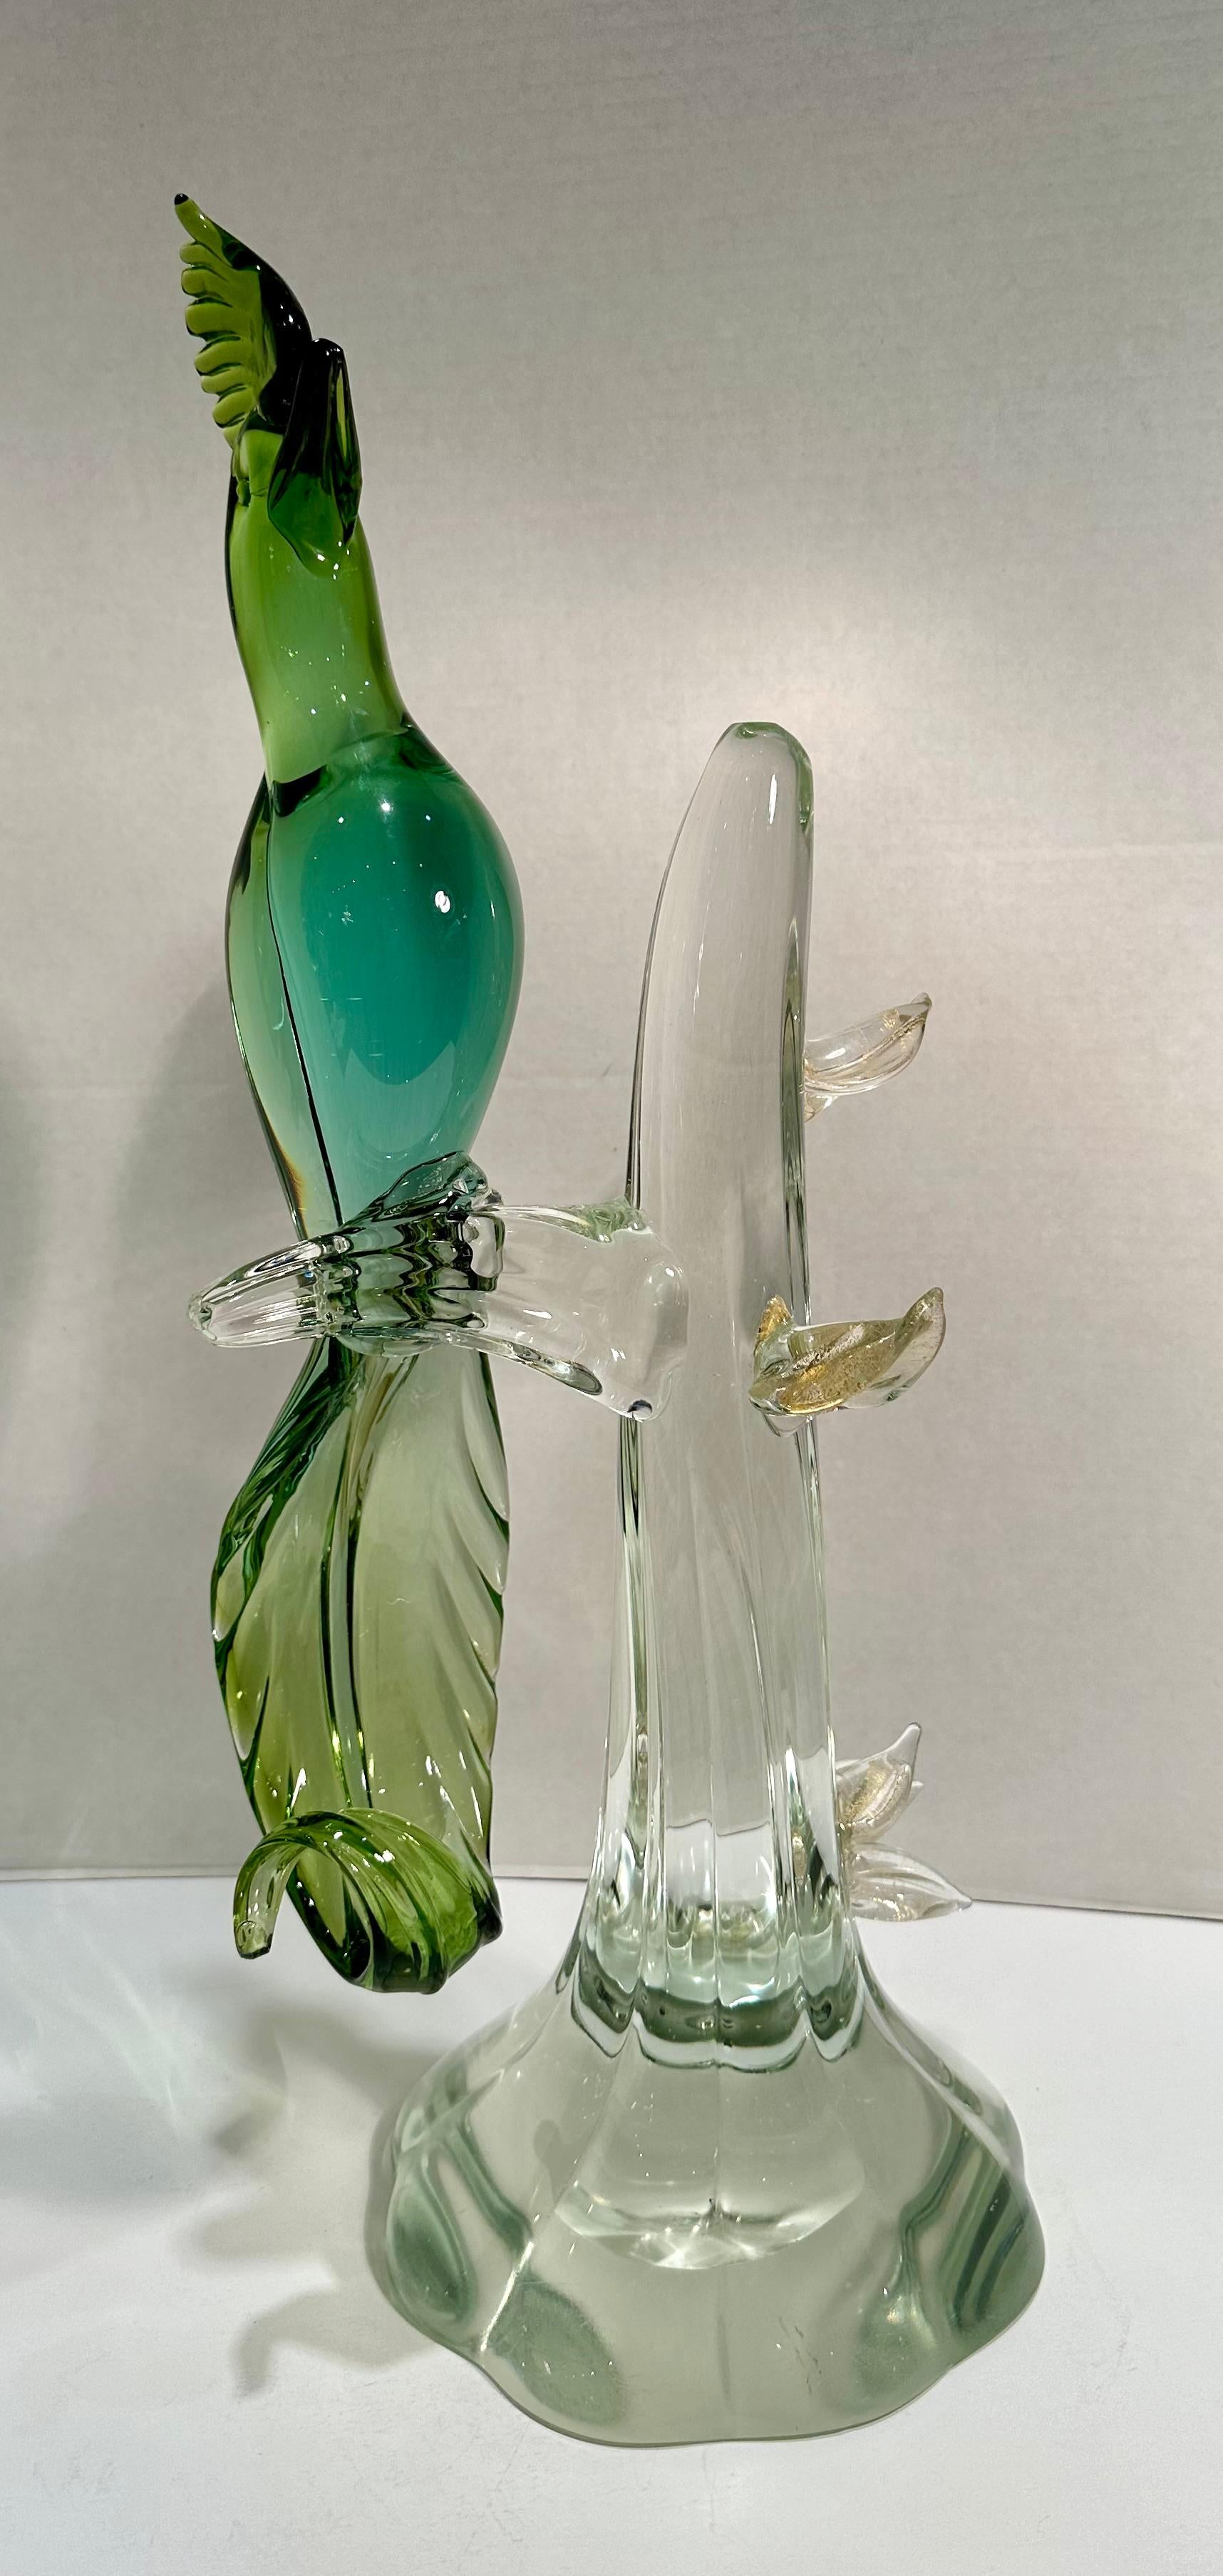 Magnificent large Salviati Murano Italy hand-made and mouth-blown glass figurine of an exotic bird with feathered plume and sweeping tail. The green color at the head and plume fades down into an emerald green body that becomes a lighter green in